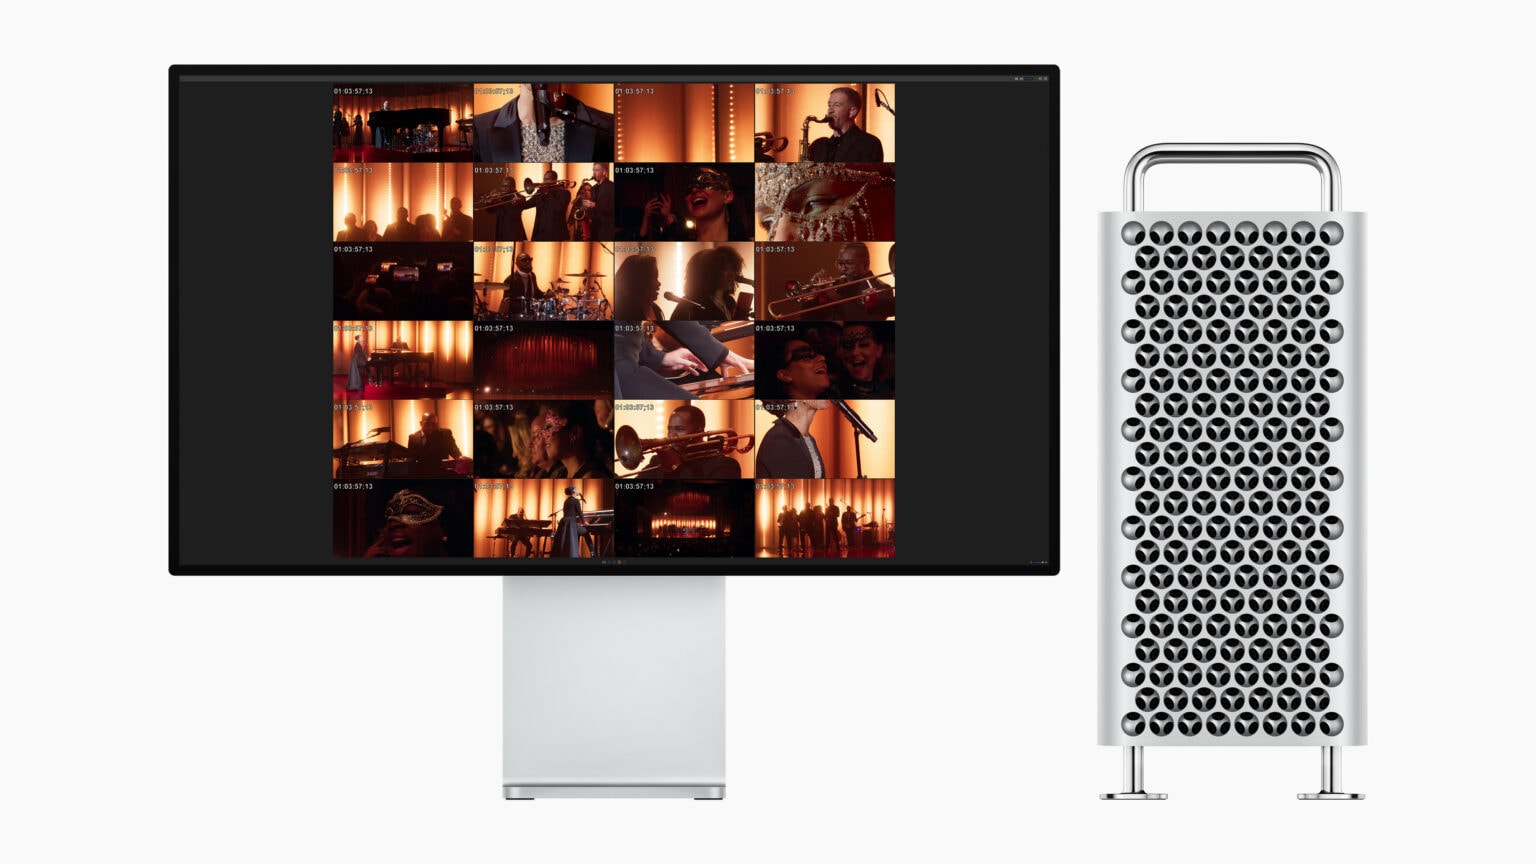 The new Mac Pro features Apple's powerful M2 Ultra chip with PCI expansion.